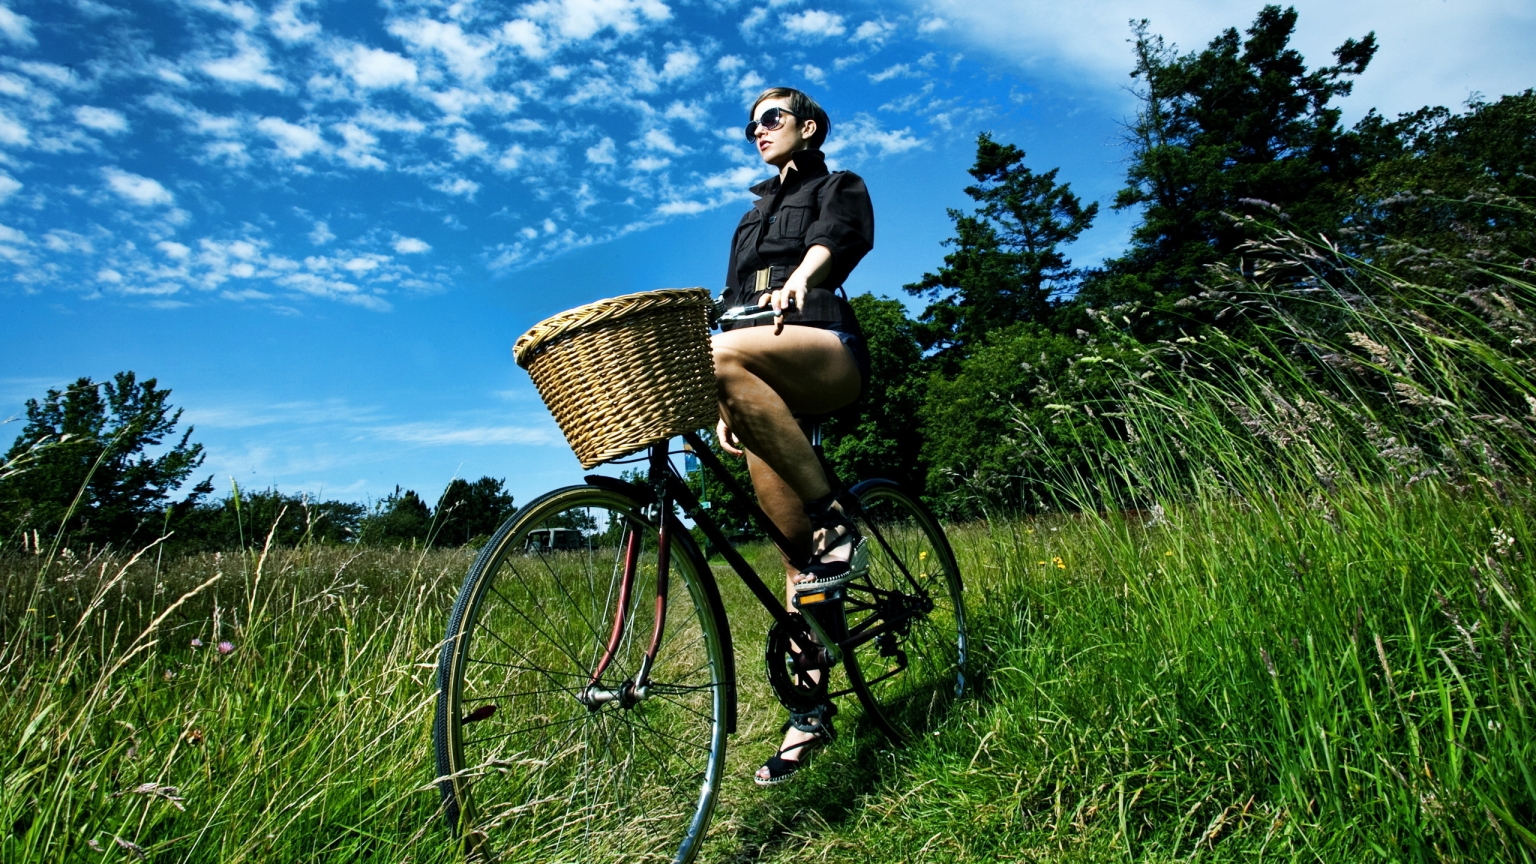 Cool Lady on Bike for 1536 x 864 HDTV resolution